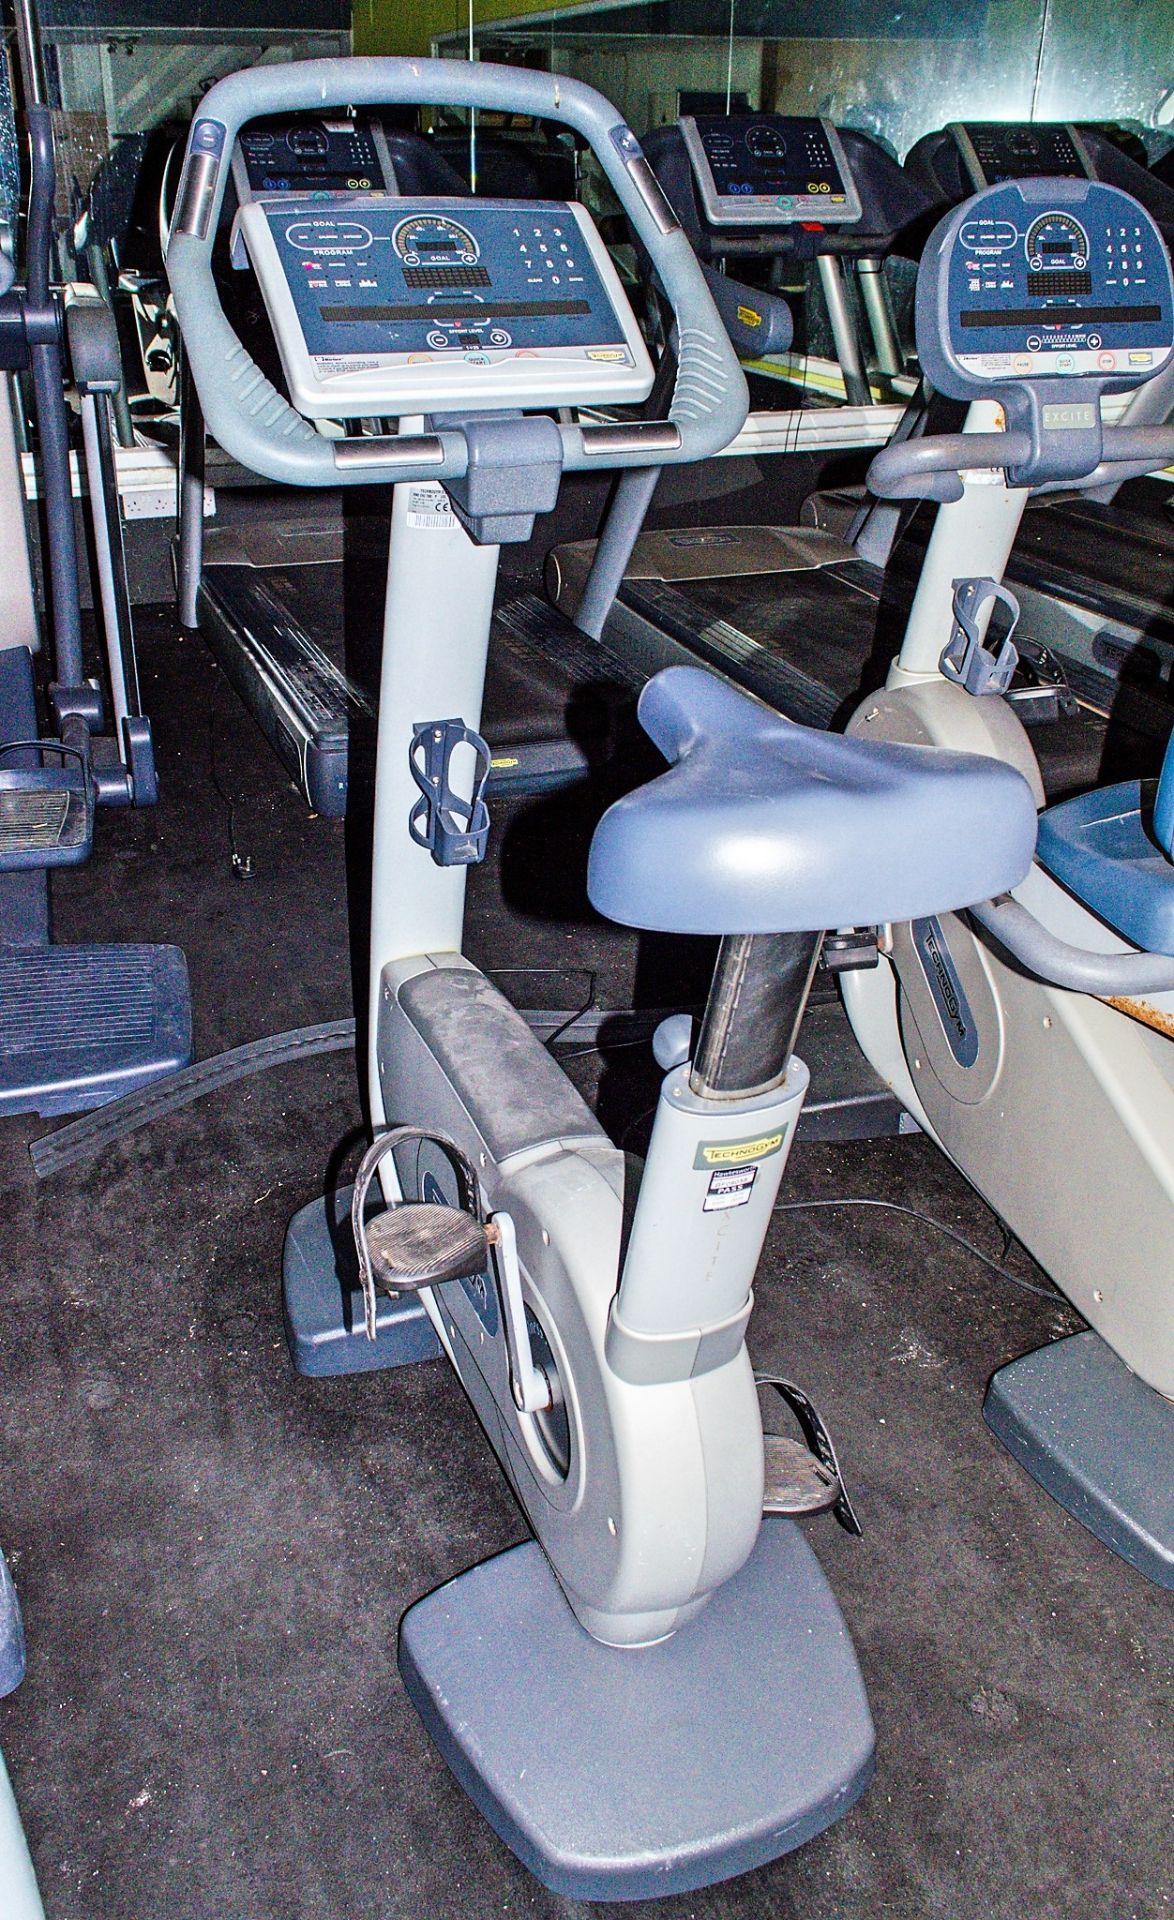 Technogym Excite 700 exercise bike ** No VAT on hammer price but VAT will be charged on buyers